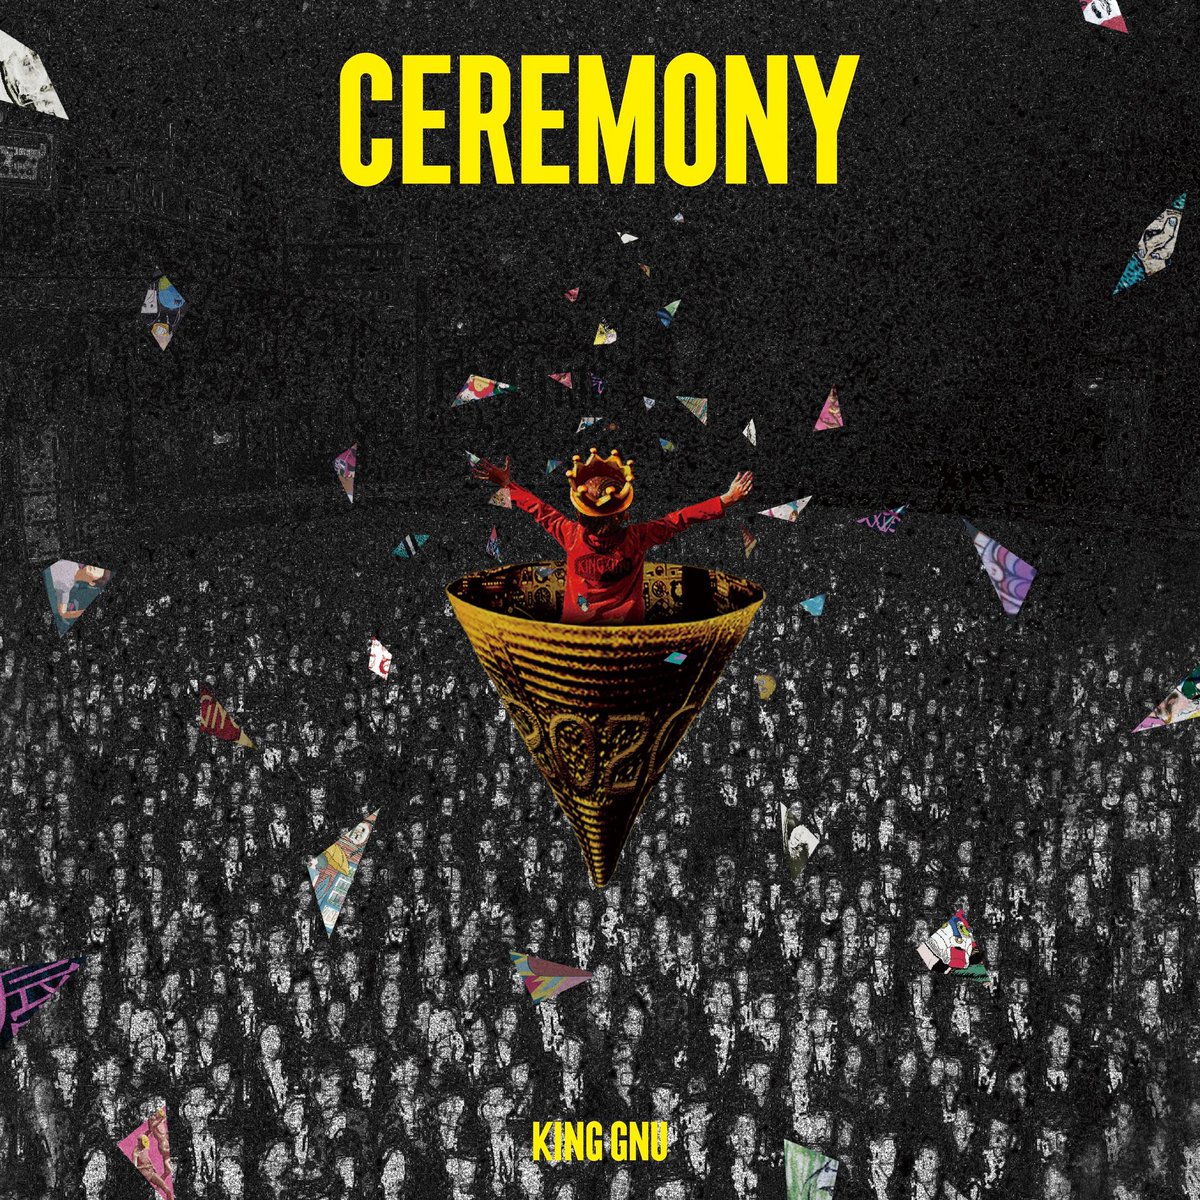 Cover for『King Gnu - Overflow』from the release『CEREMONY』